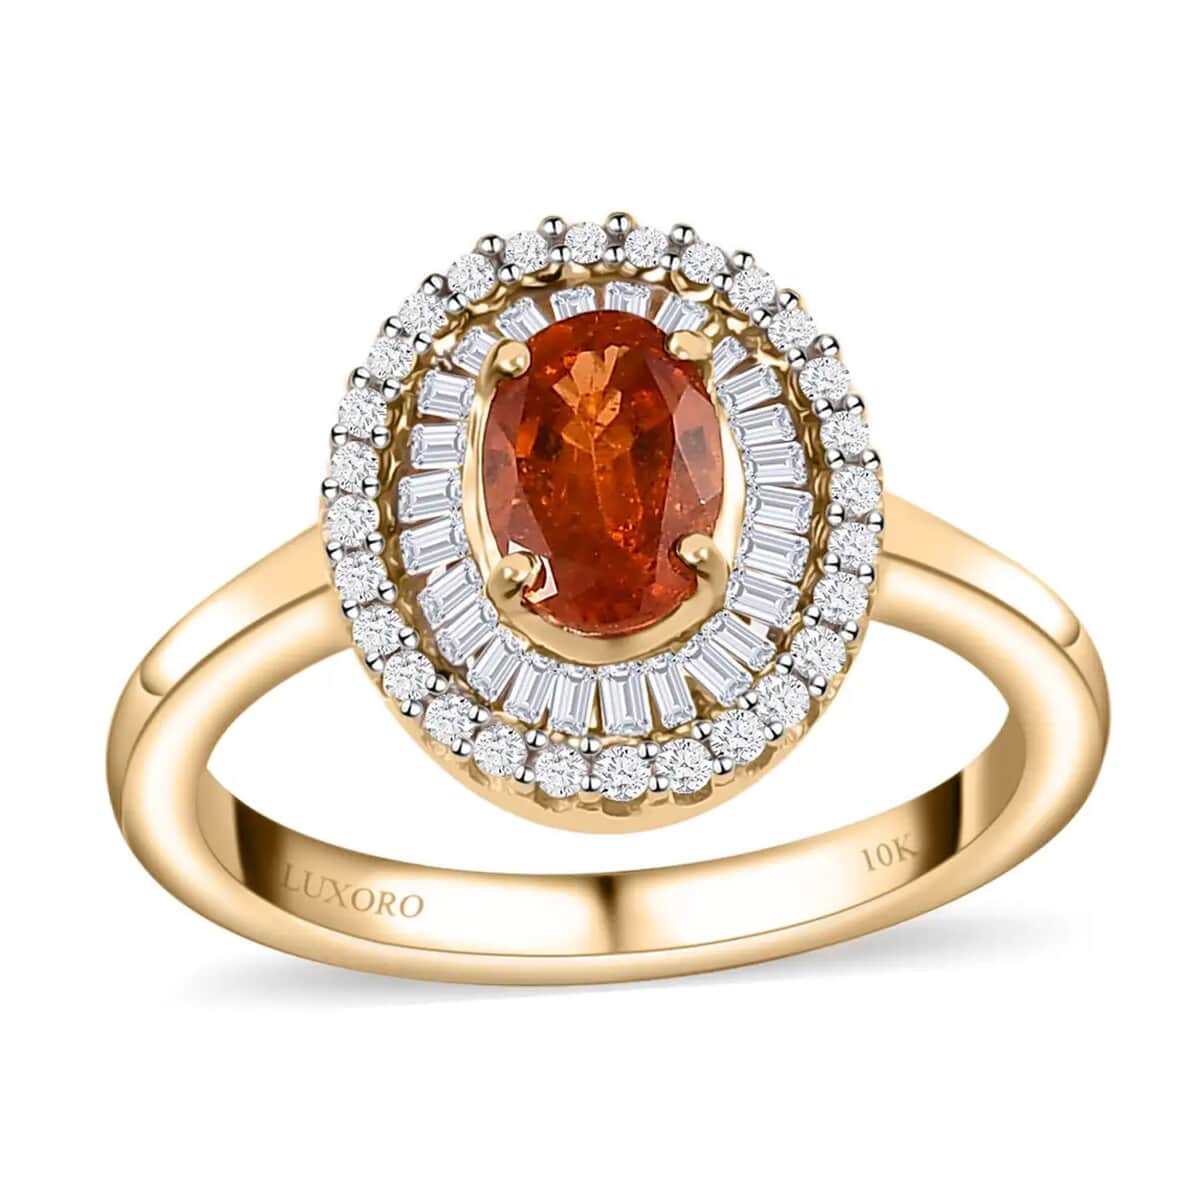 Luxoro 10K Yellow Gold AAA Nigerian Spessartite Garnet and Diamond Double Halo Ring (Size 7.0) 1.55 ctw image number 0